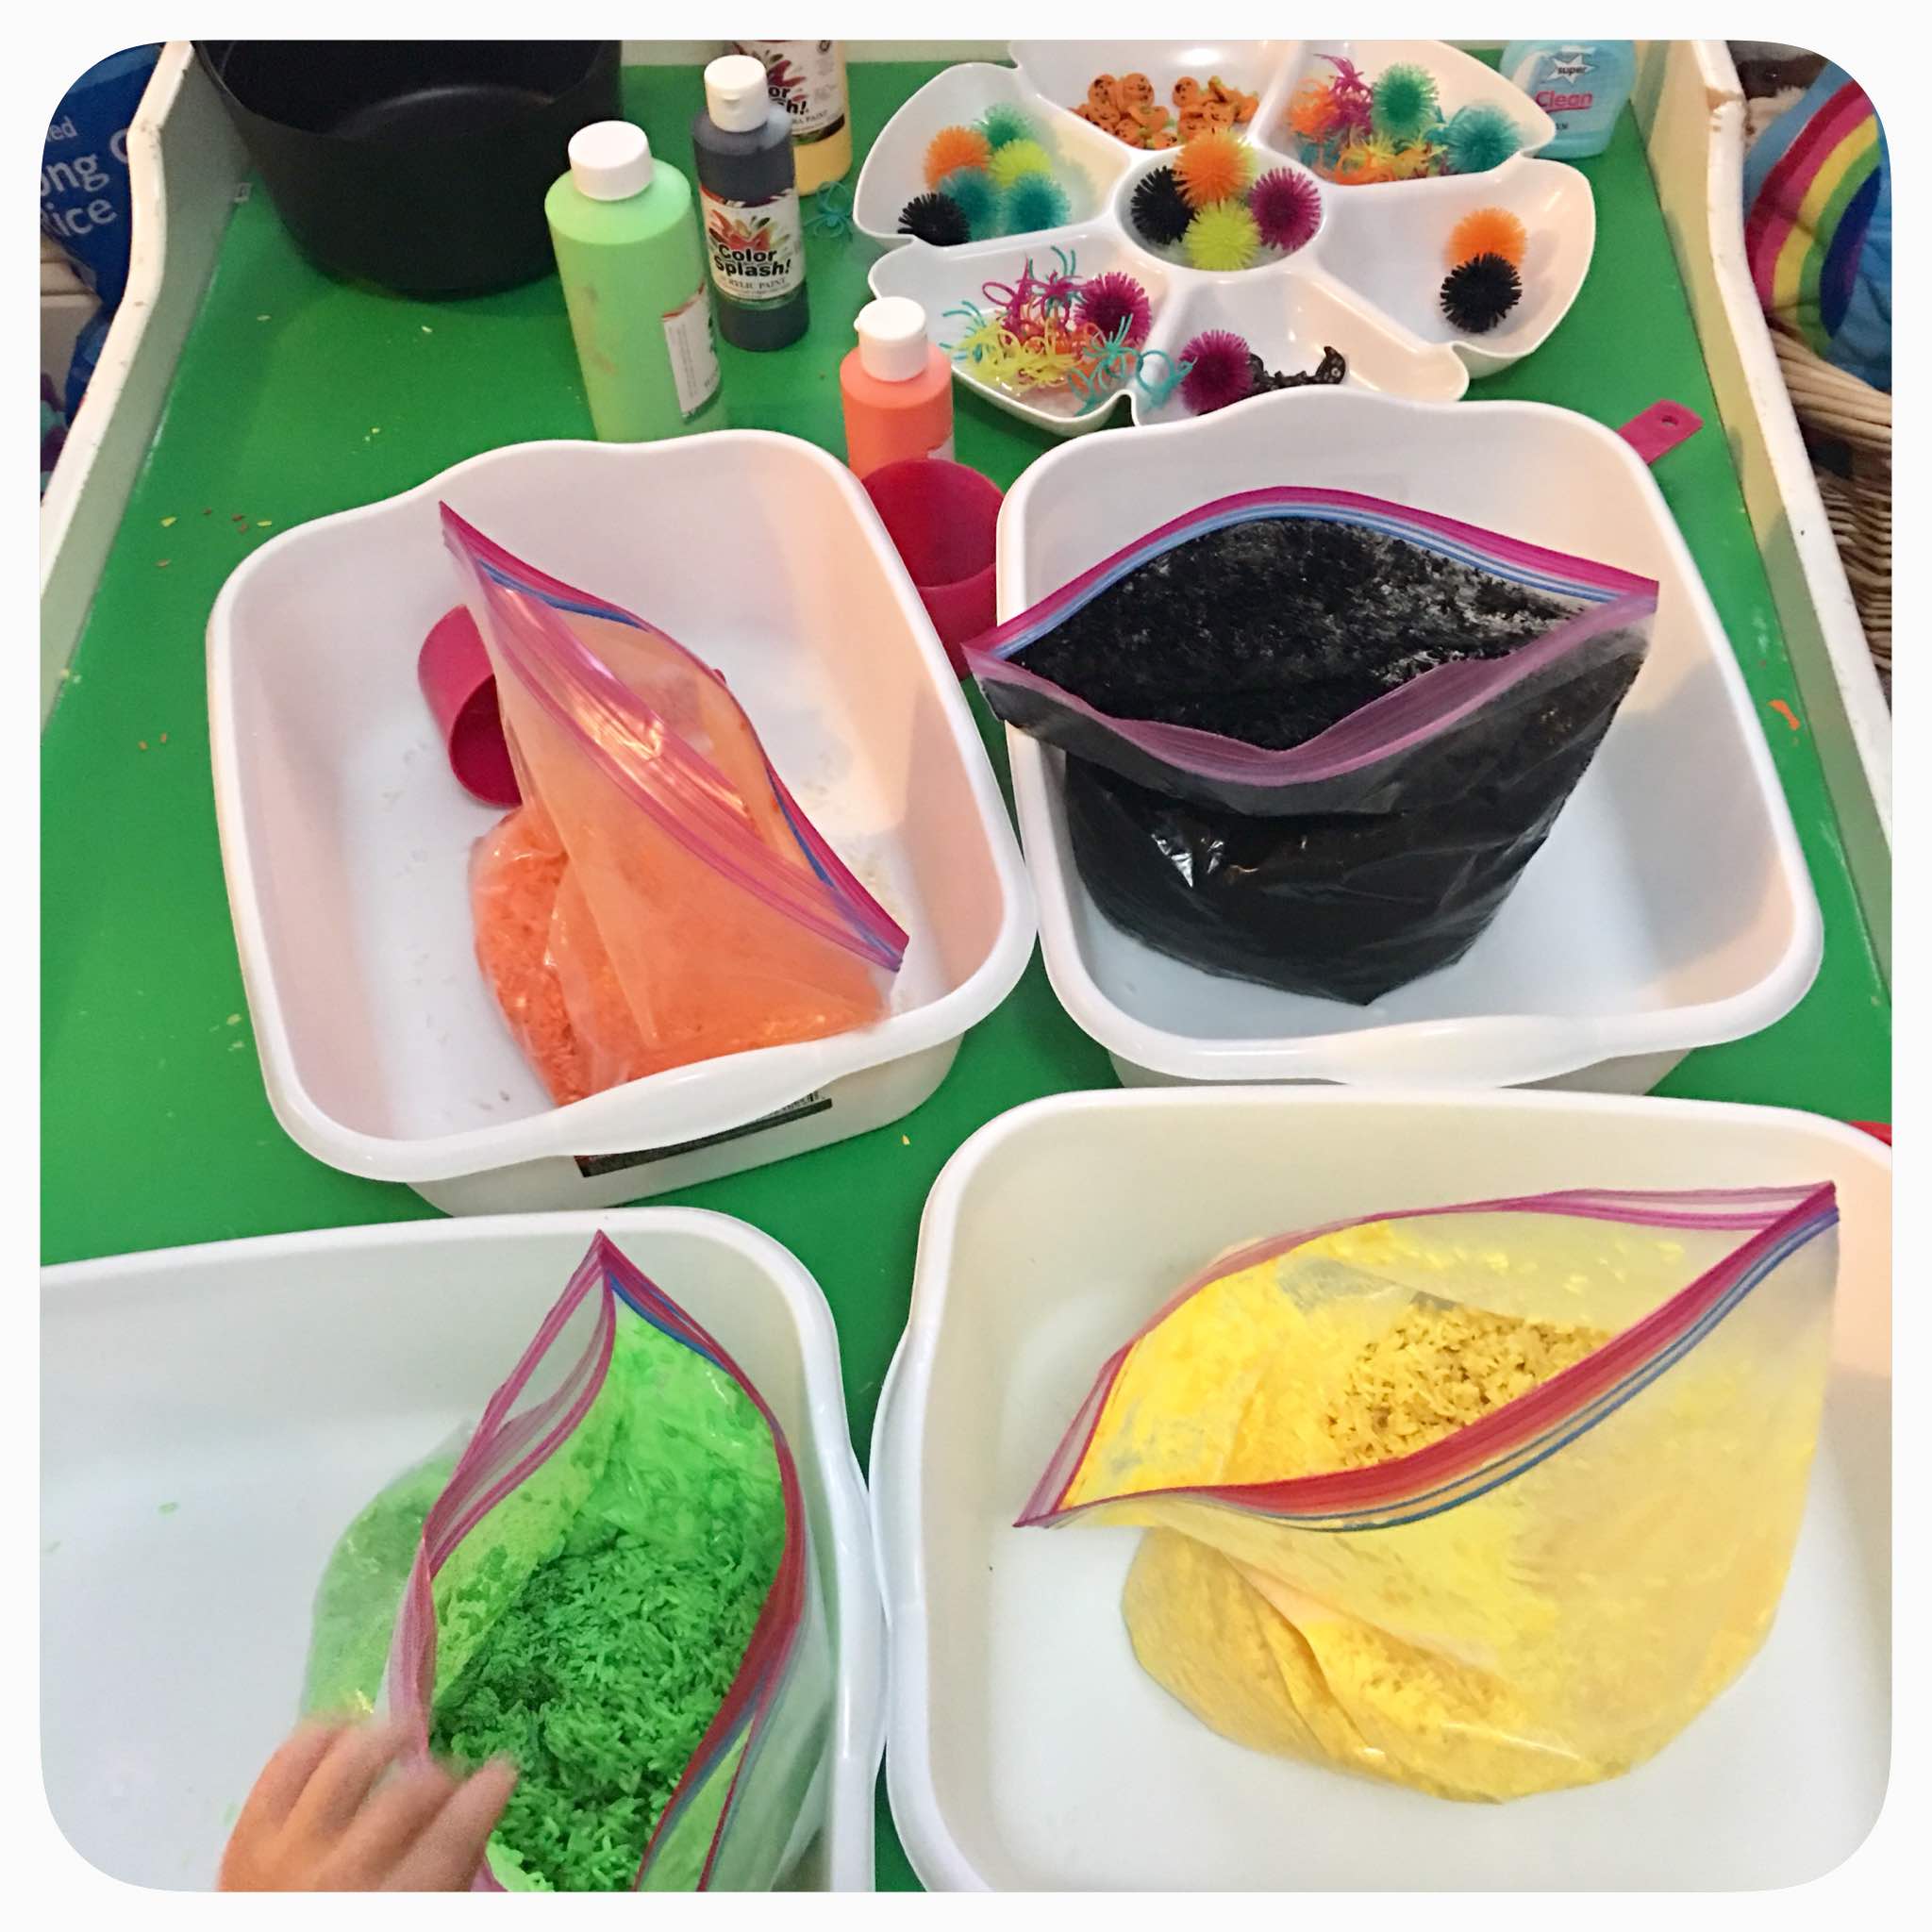 Halloween Cauldron sensory bin: created with non-toxic tempra paint and white rice. Add some fun and brightly colored spooky items and you've got yourself a fun halloween cauldron bin for your kids to enjoy for days.